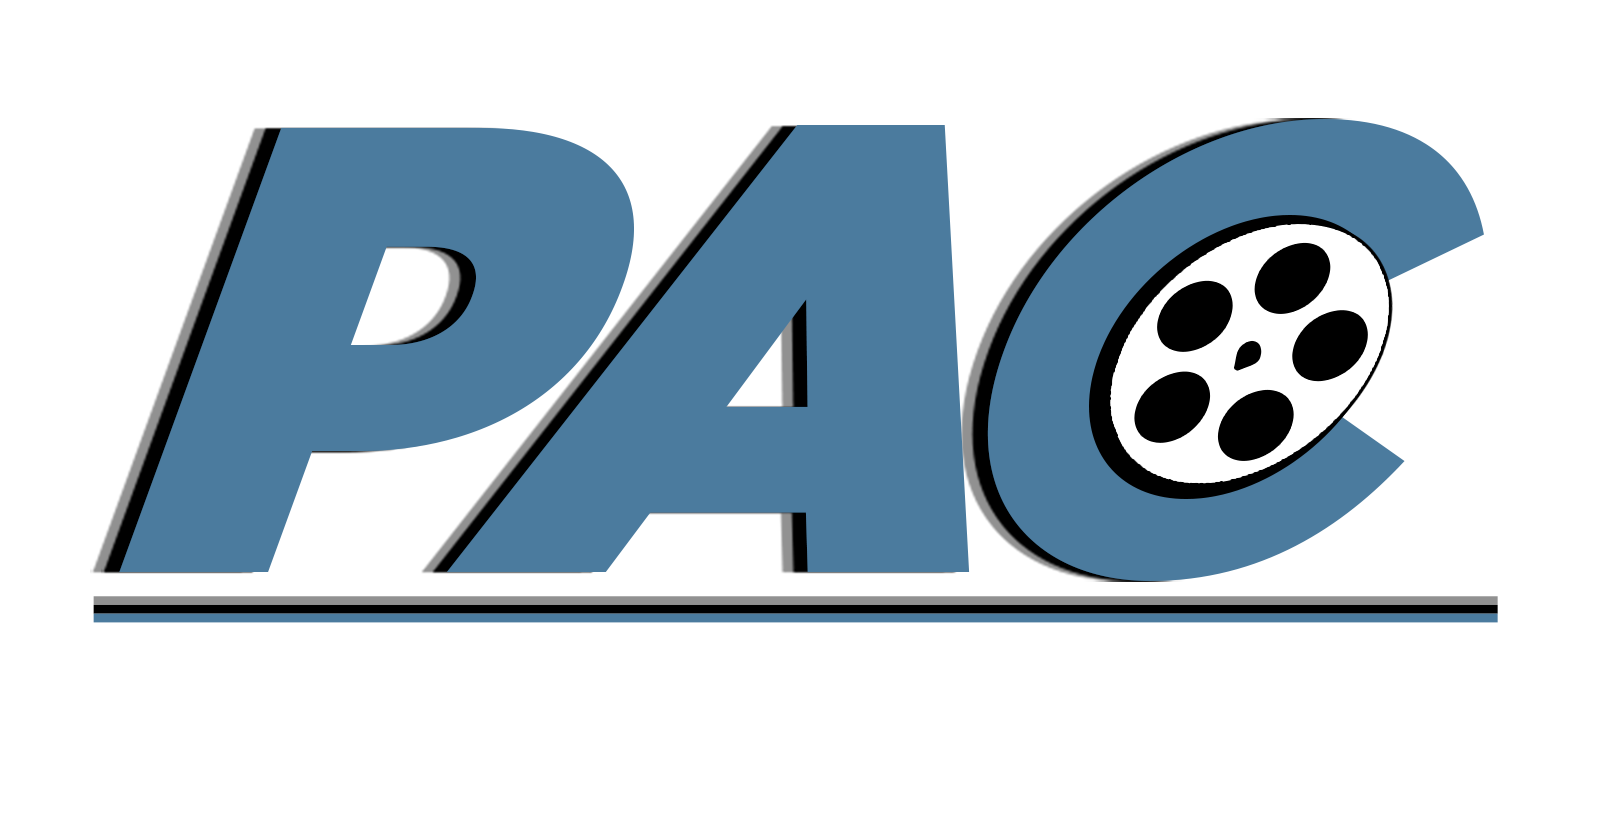 PRODUCTION ACCOUNTING CONSULTANTS